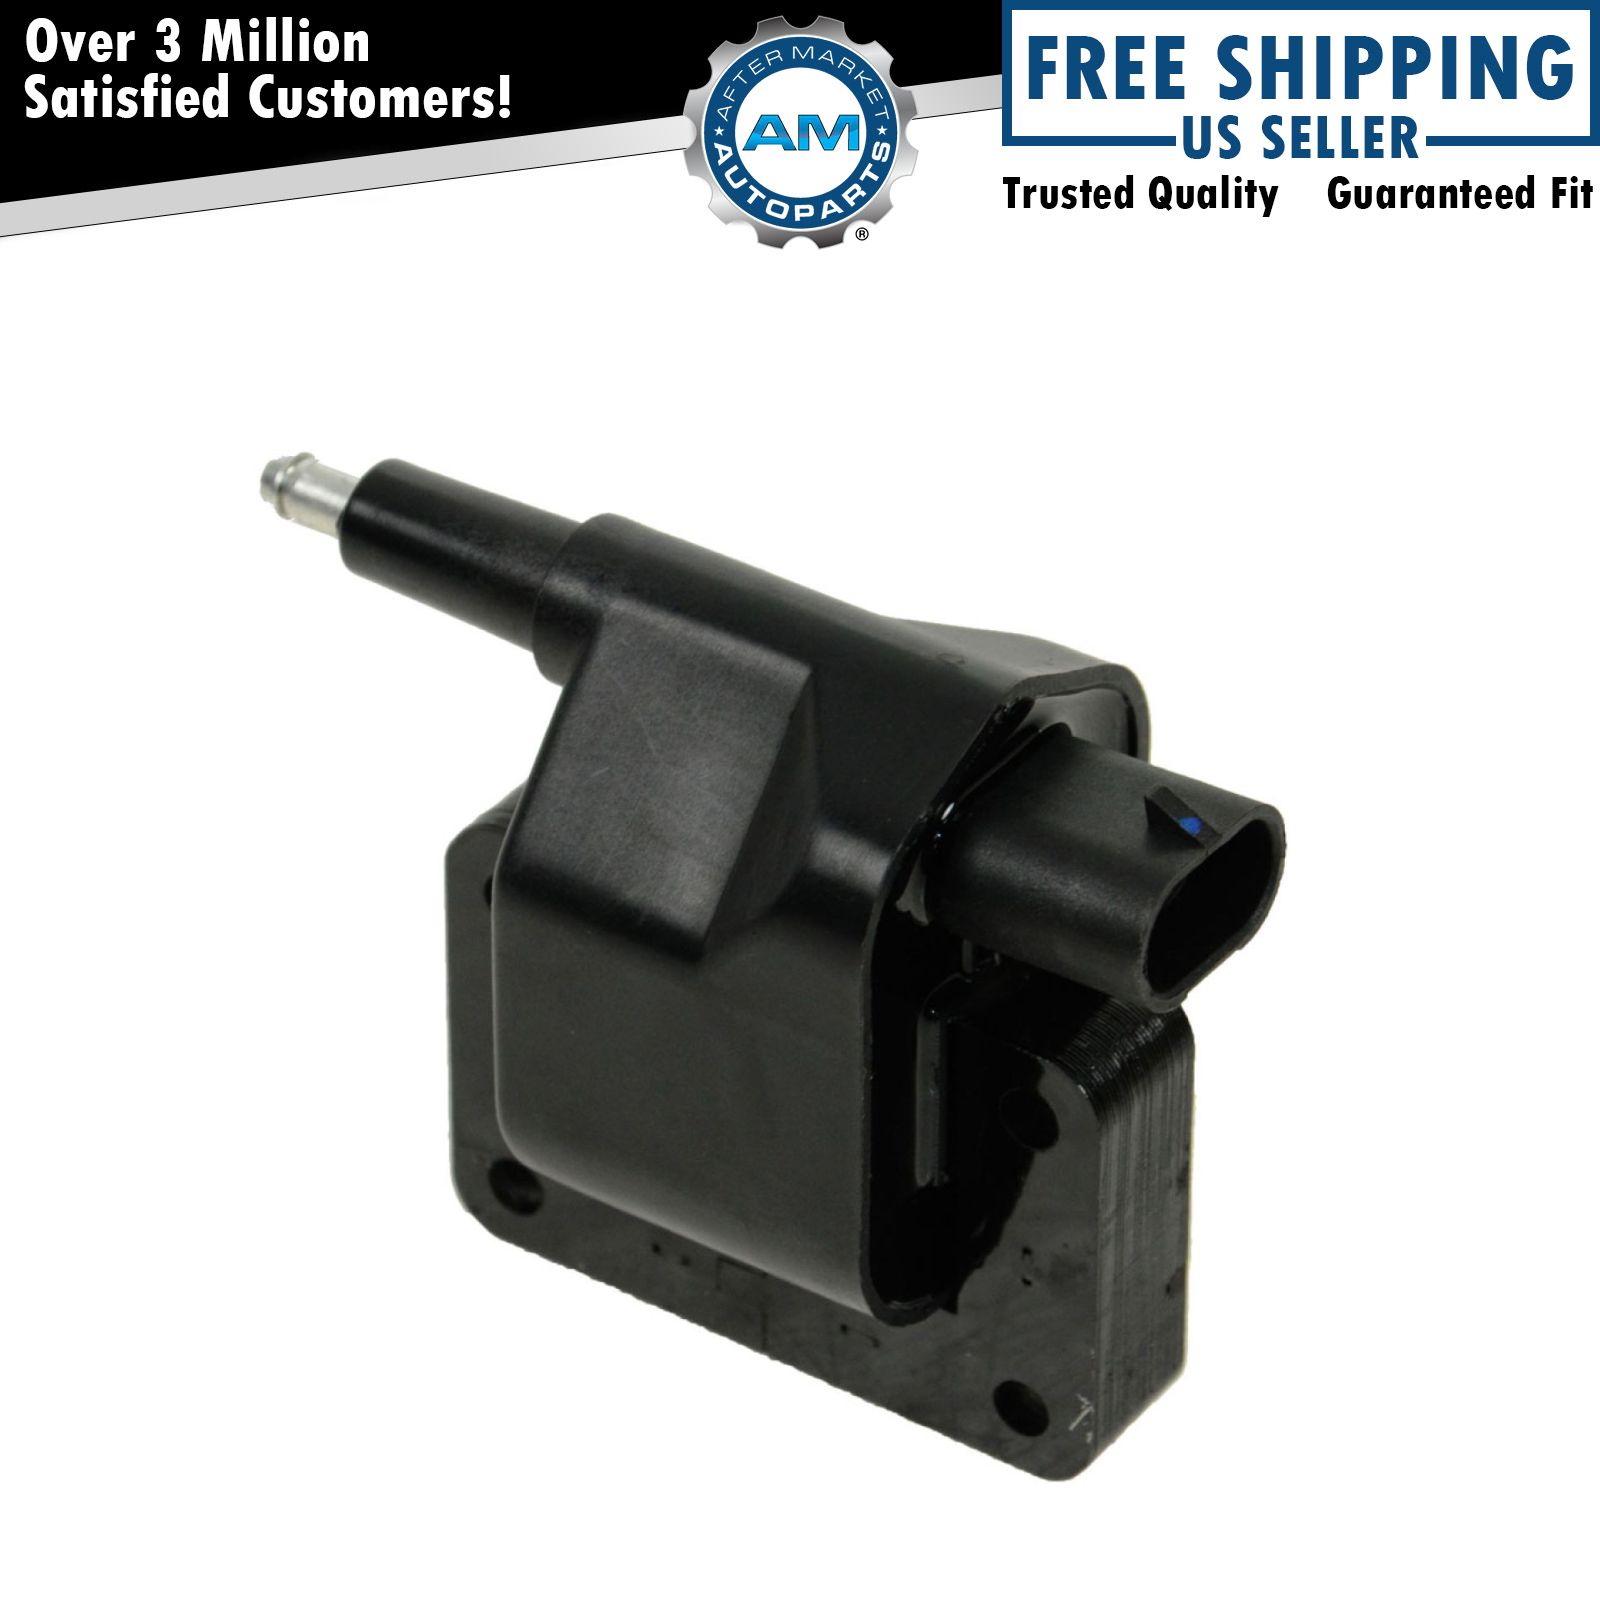 Ignition Spark Coil for Dodge Ram 1500 Pickup Truck Chrysler Jeep Plymouth